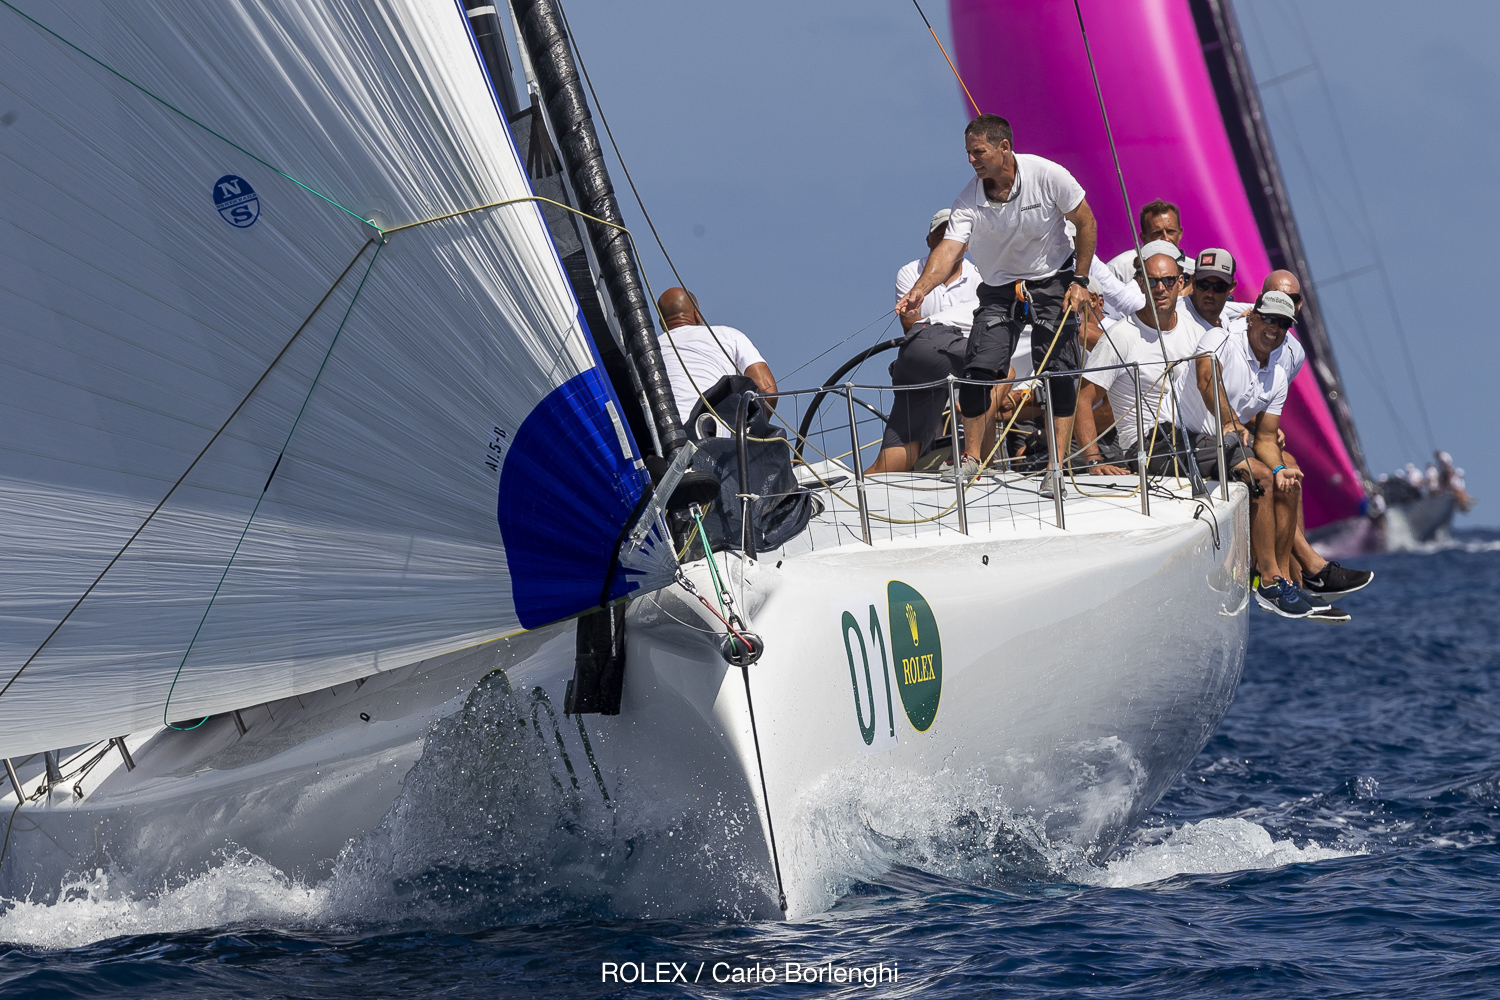 Interview with Vasco Vascotto Maxi 72 Cannonball tactician - Maxi Yacht Rolex Cup 2018 - NEWS - Yacht Club Costa Smeralda